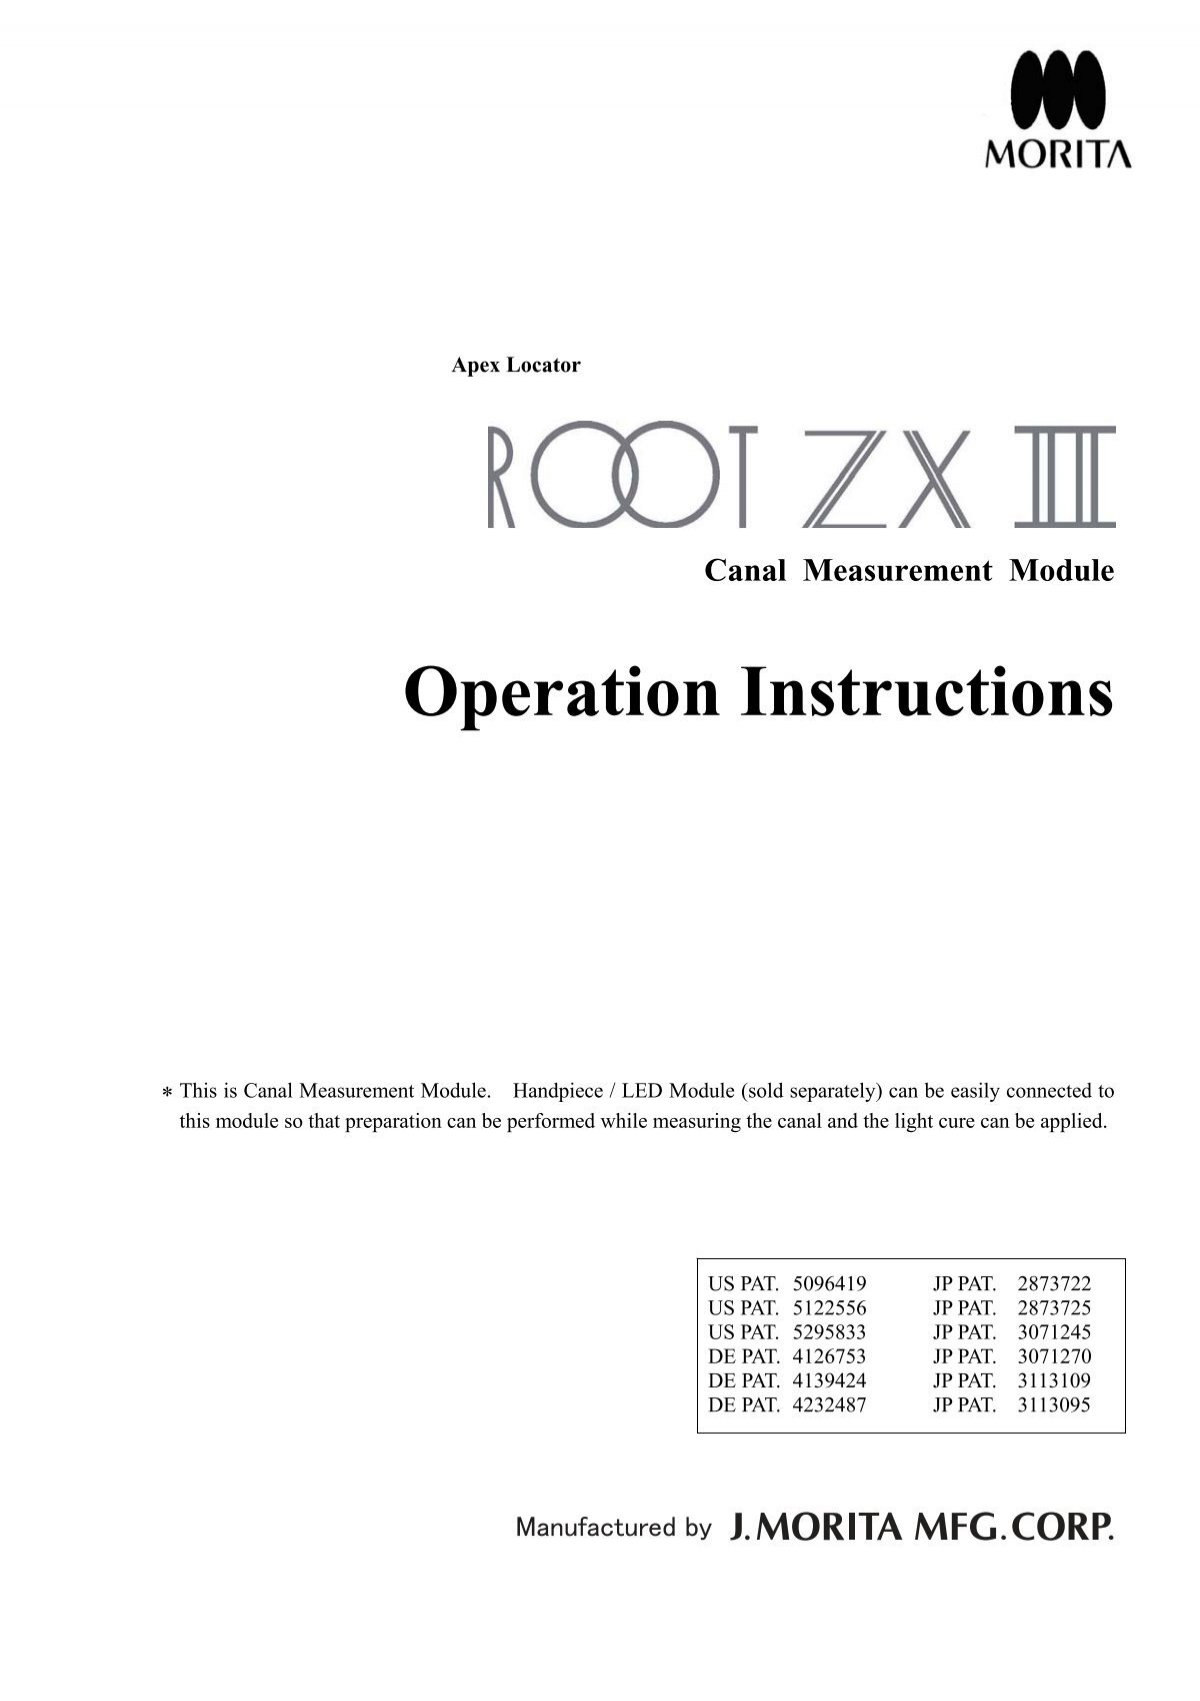 Root ZX II Apex Locator Instructions for Use - Morita